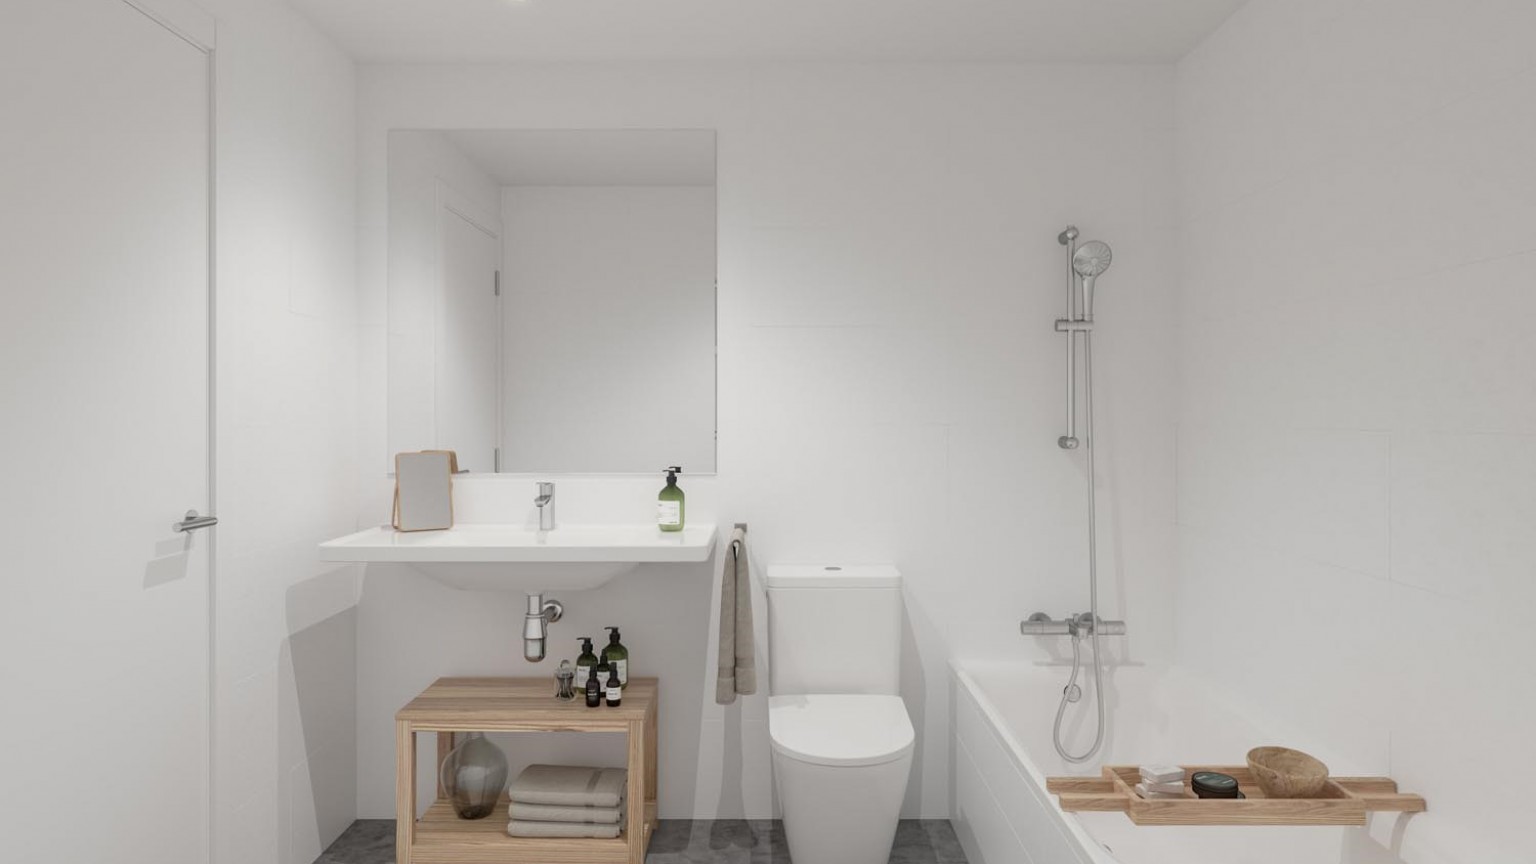 New construction flat for sale, in Girona in the Montilivi district. 